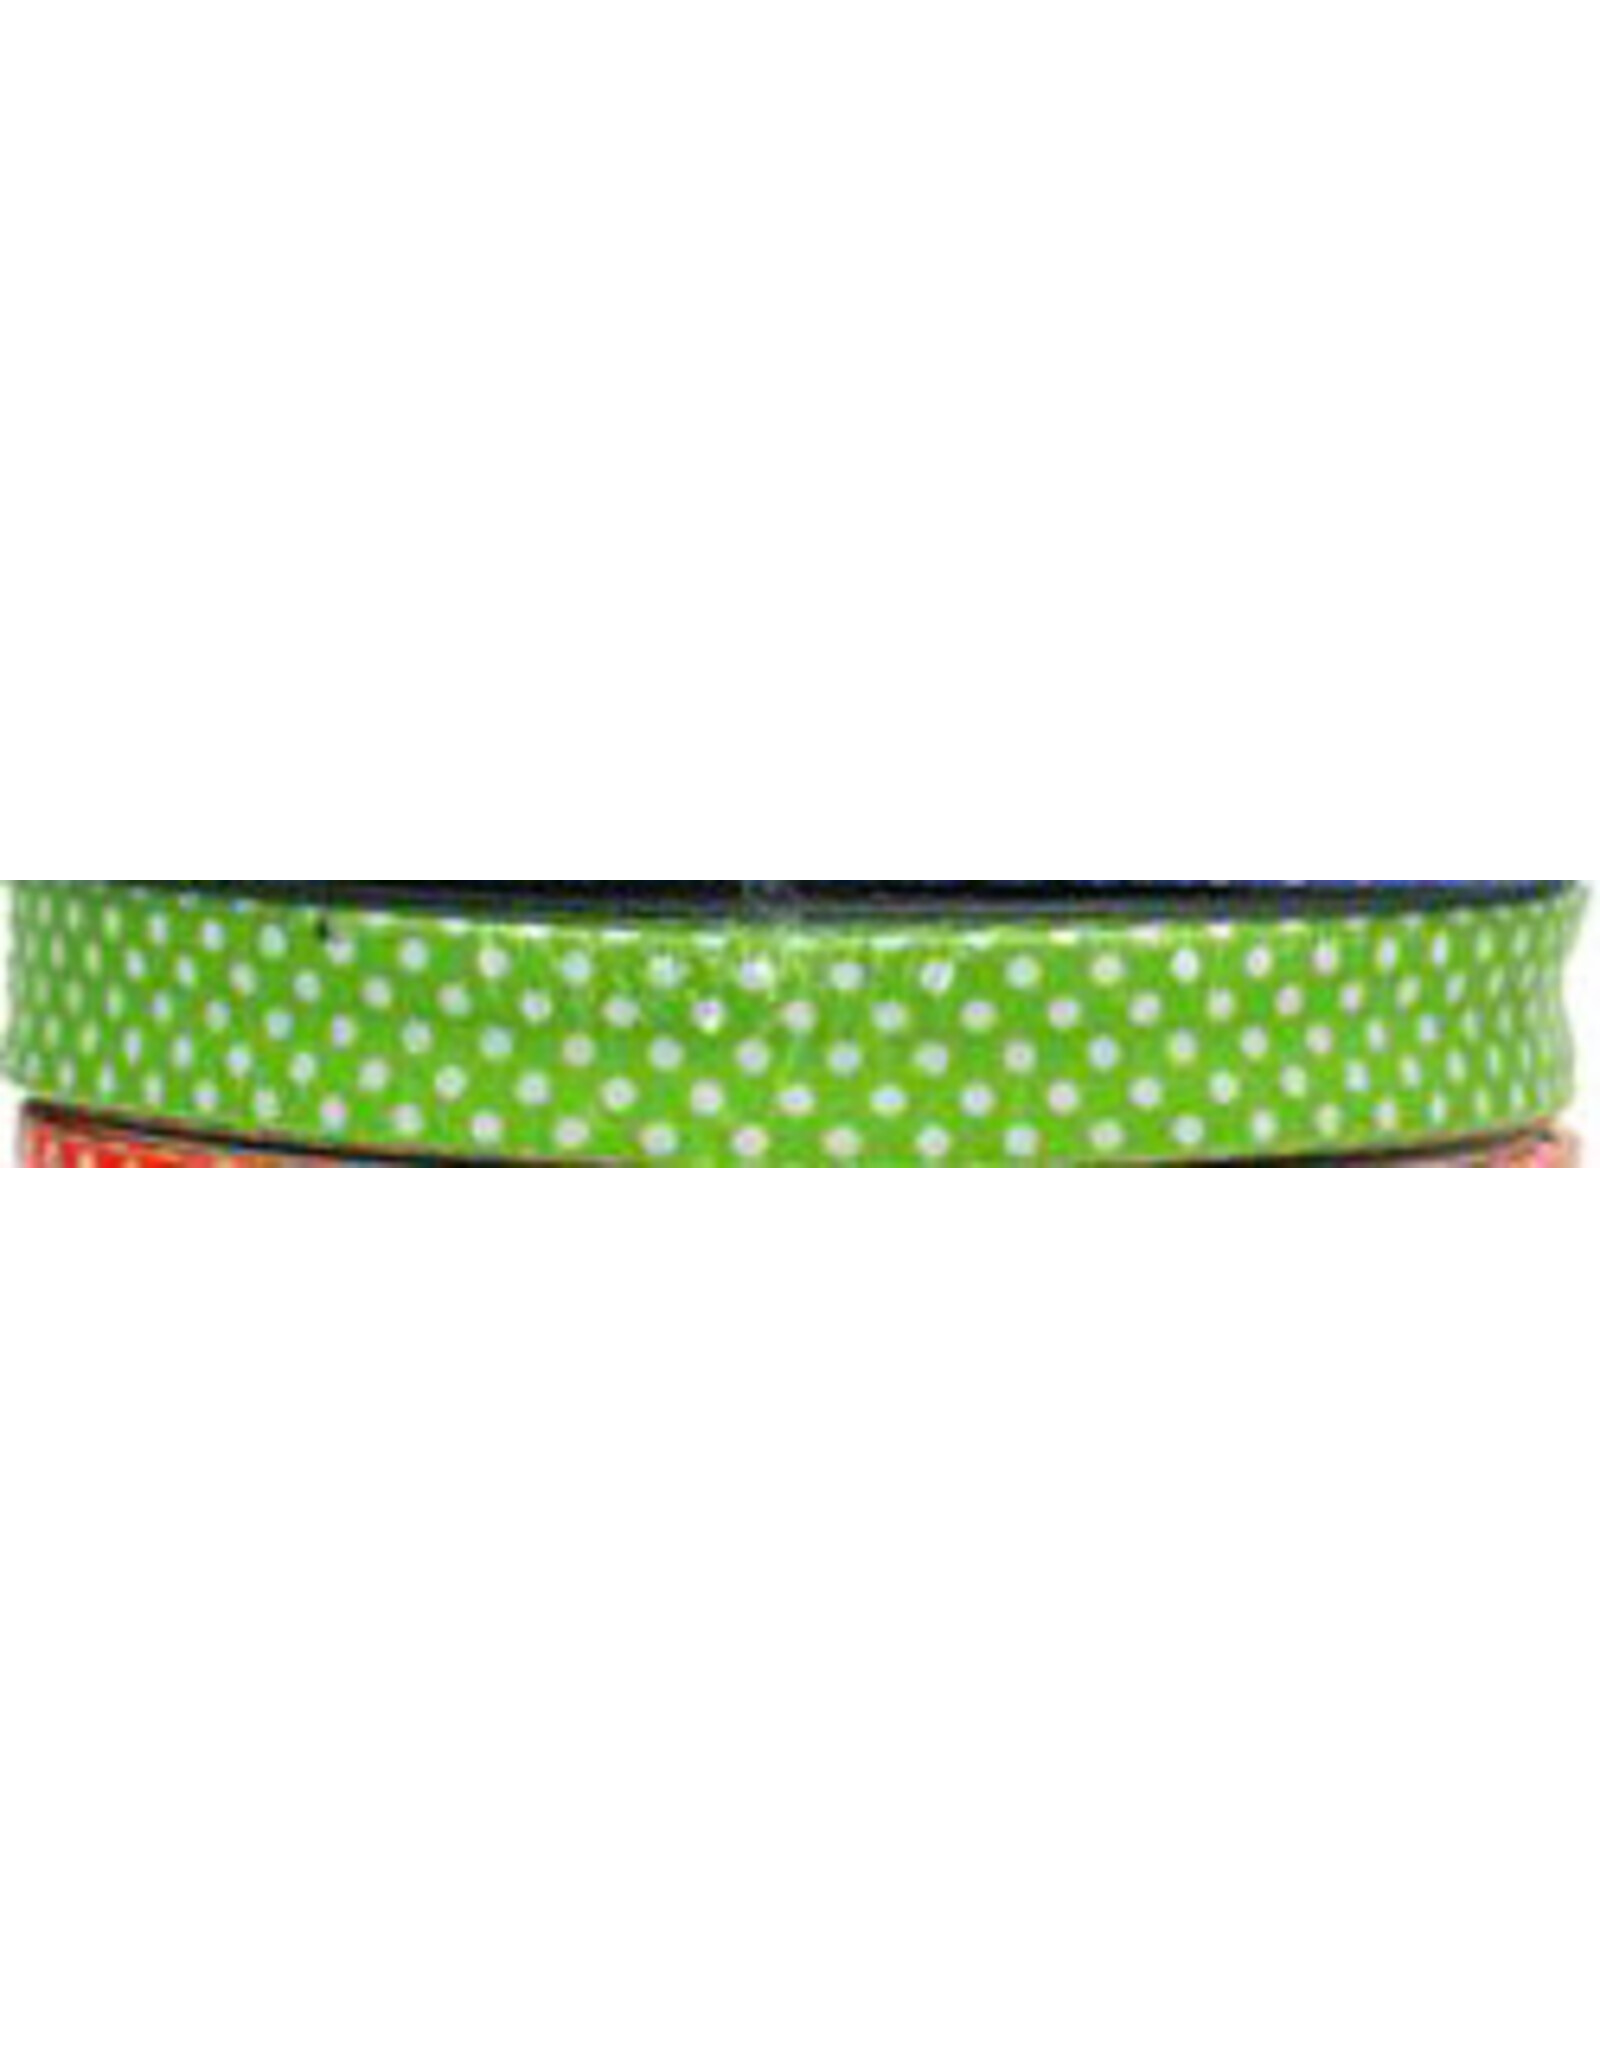 Restyle Biais Tape - 1 meter - dot - green - 18 mm